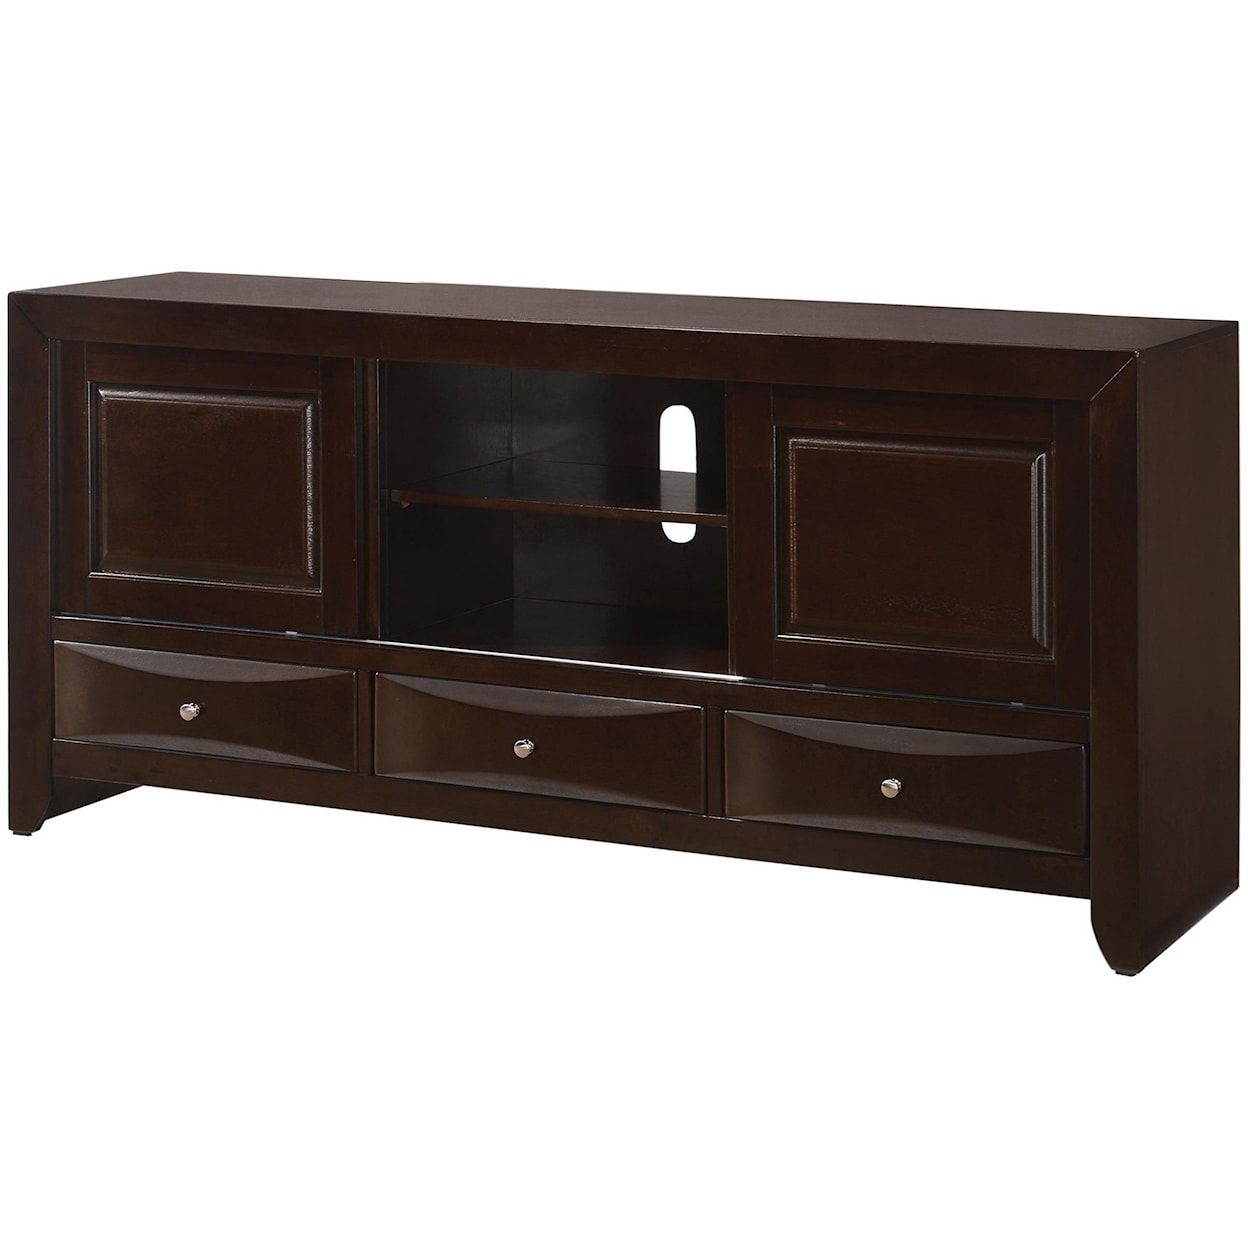 Crown Mark Emily TV Stand